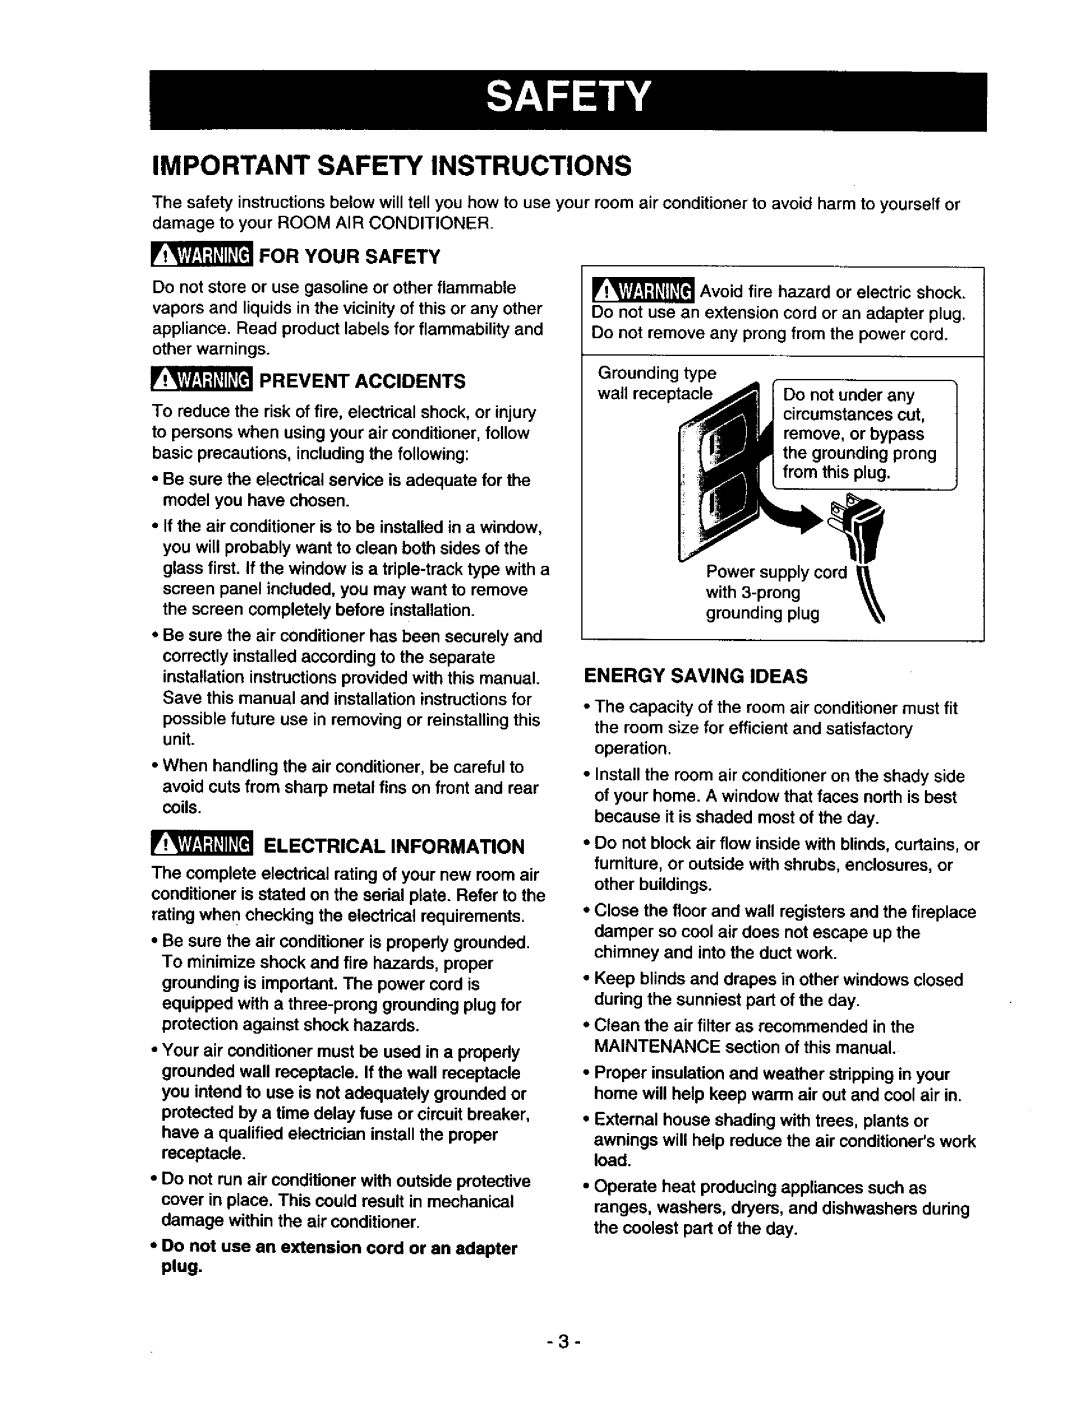 Kenmore 78122 owner manual Important Safety Instructions, For Your Safety, Prevent Accidents, Electrical Information 